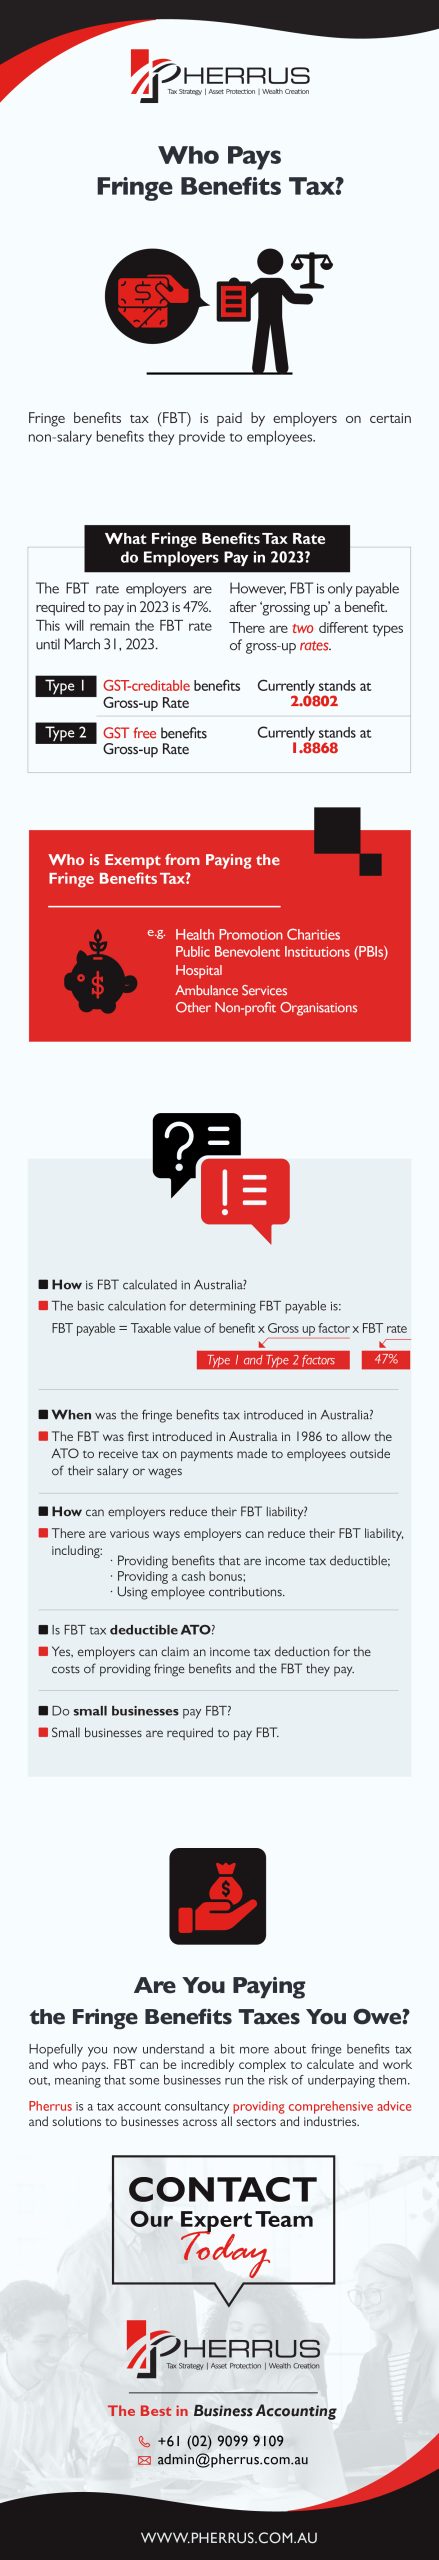 Who Pays Fringe Benefits Tax Infographic